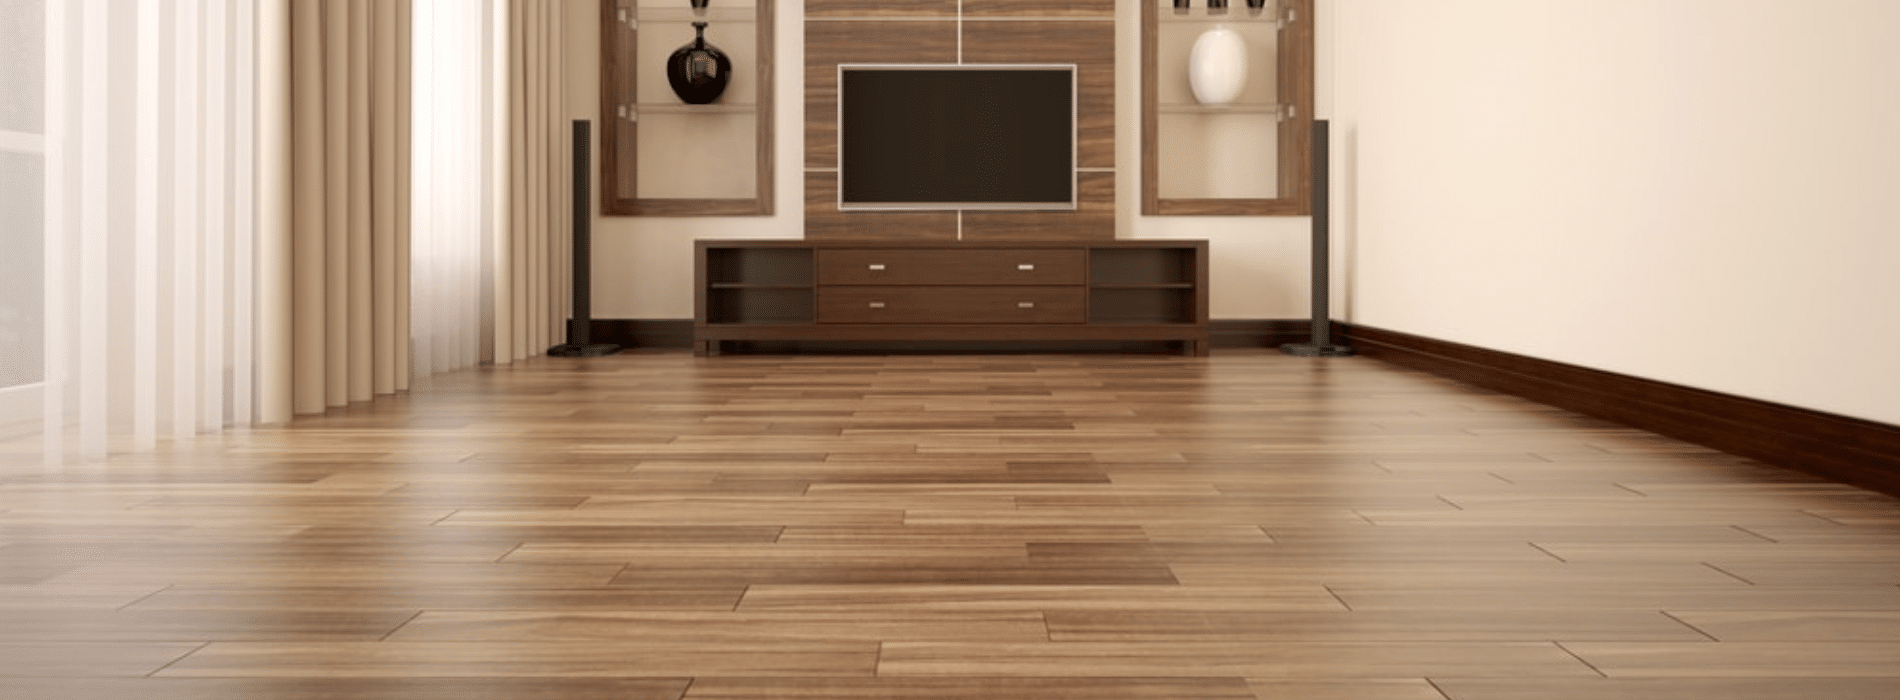 A stunning display of modern elegance, Urbane Living Wood Flooring adds sophistication and warmth to any space. The rich textures and natural beauty of the wood grains create a timeless aesthetic, perfectly complementing contemporary interiors. Experience luxurious living with Urbane Living Wood Flooring.